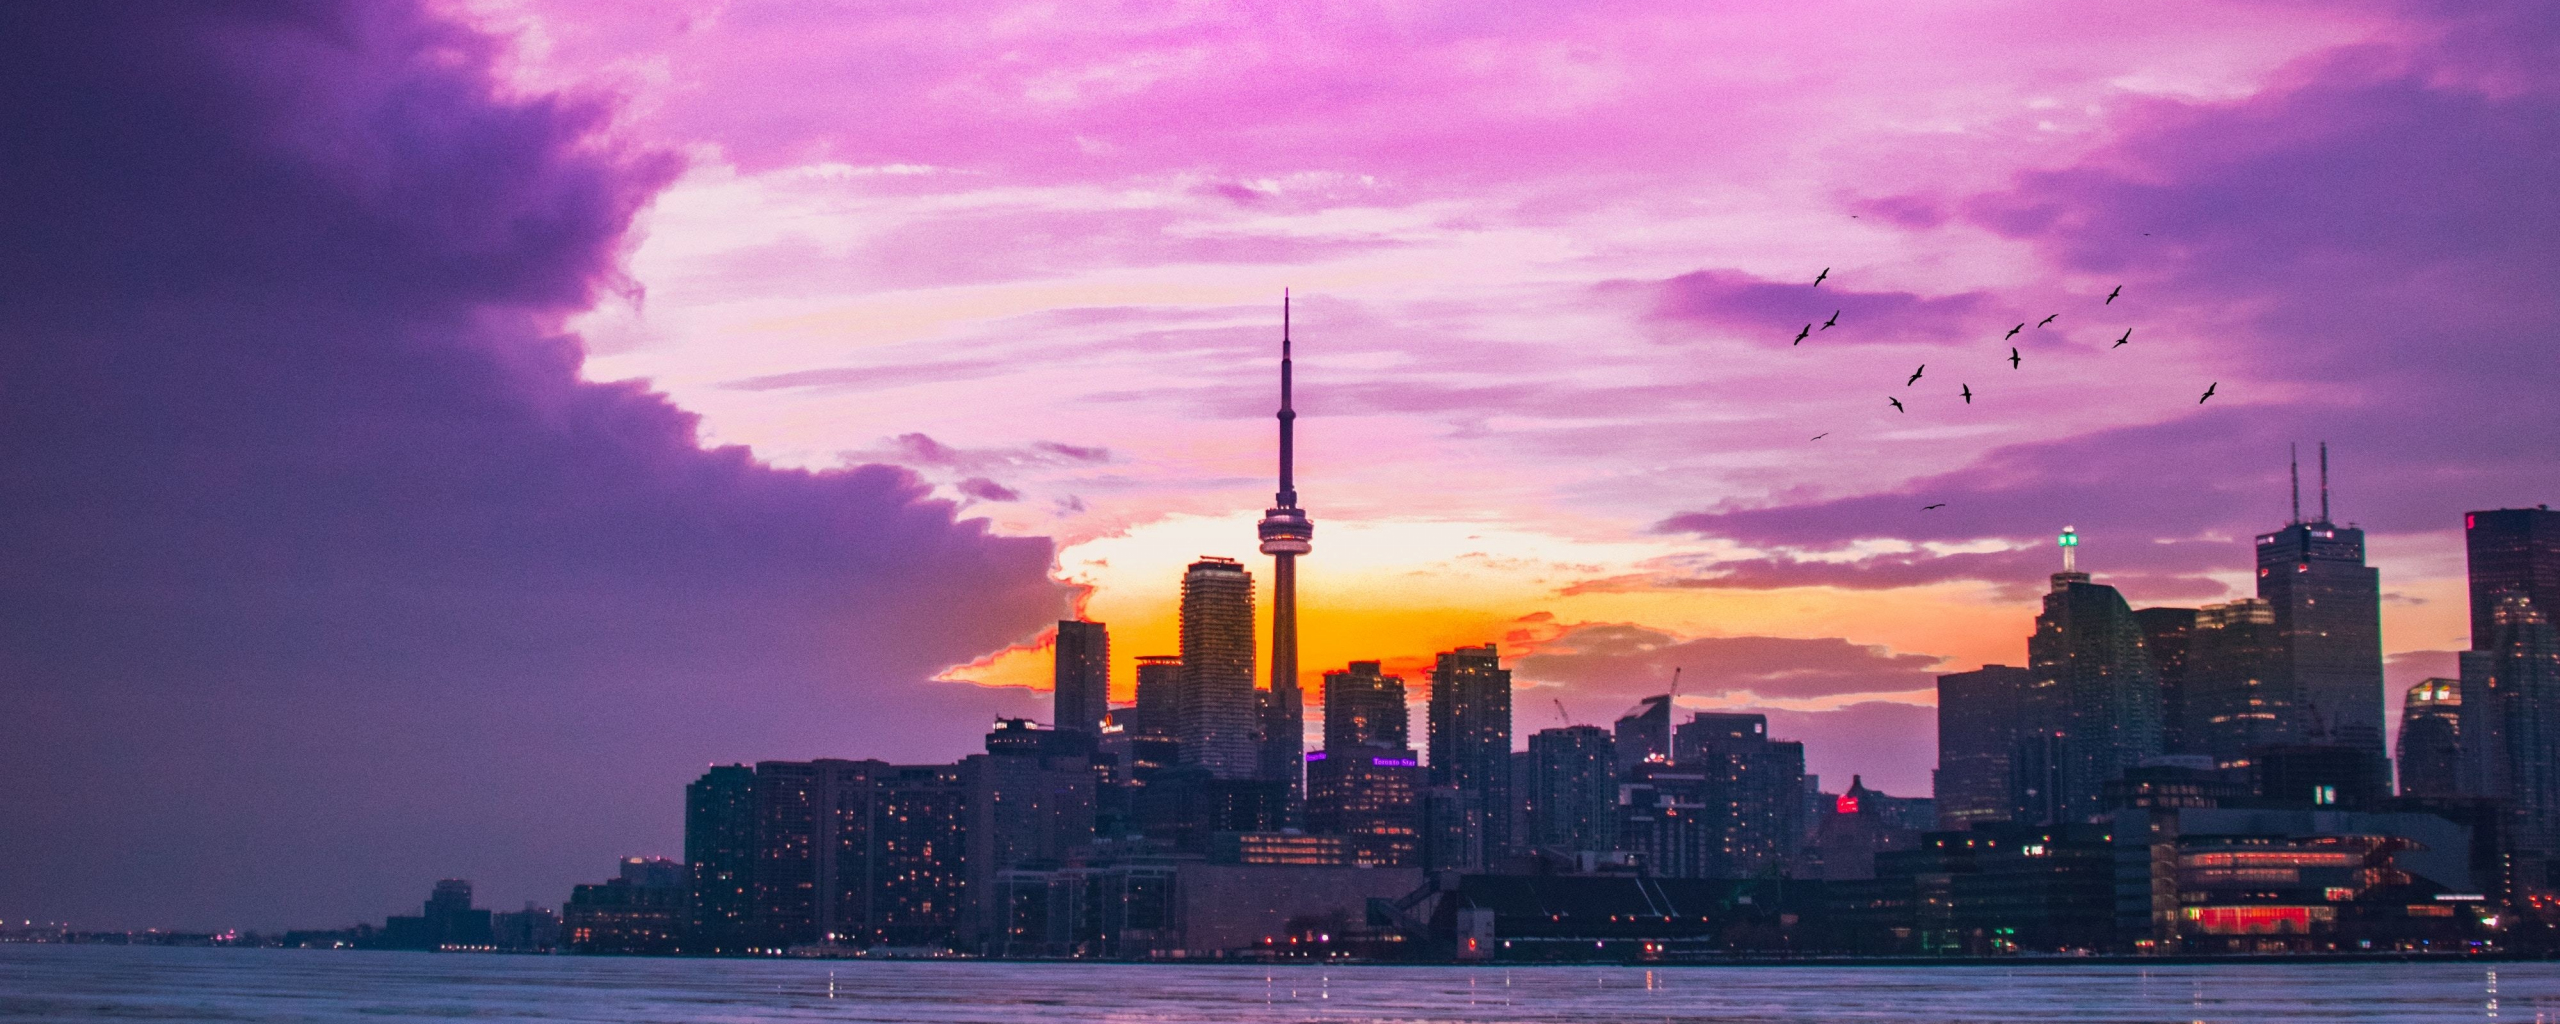 Download city, sunset, pink sky, buildings 2560x1024 wallpaper, dual wide 21:9 2560x1024 HD image, background, 21605